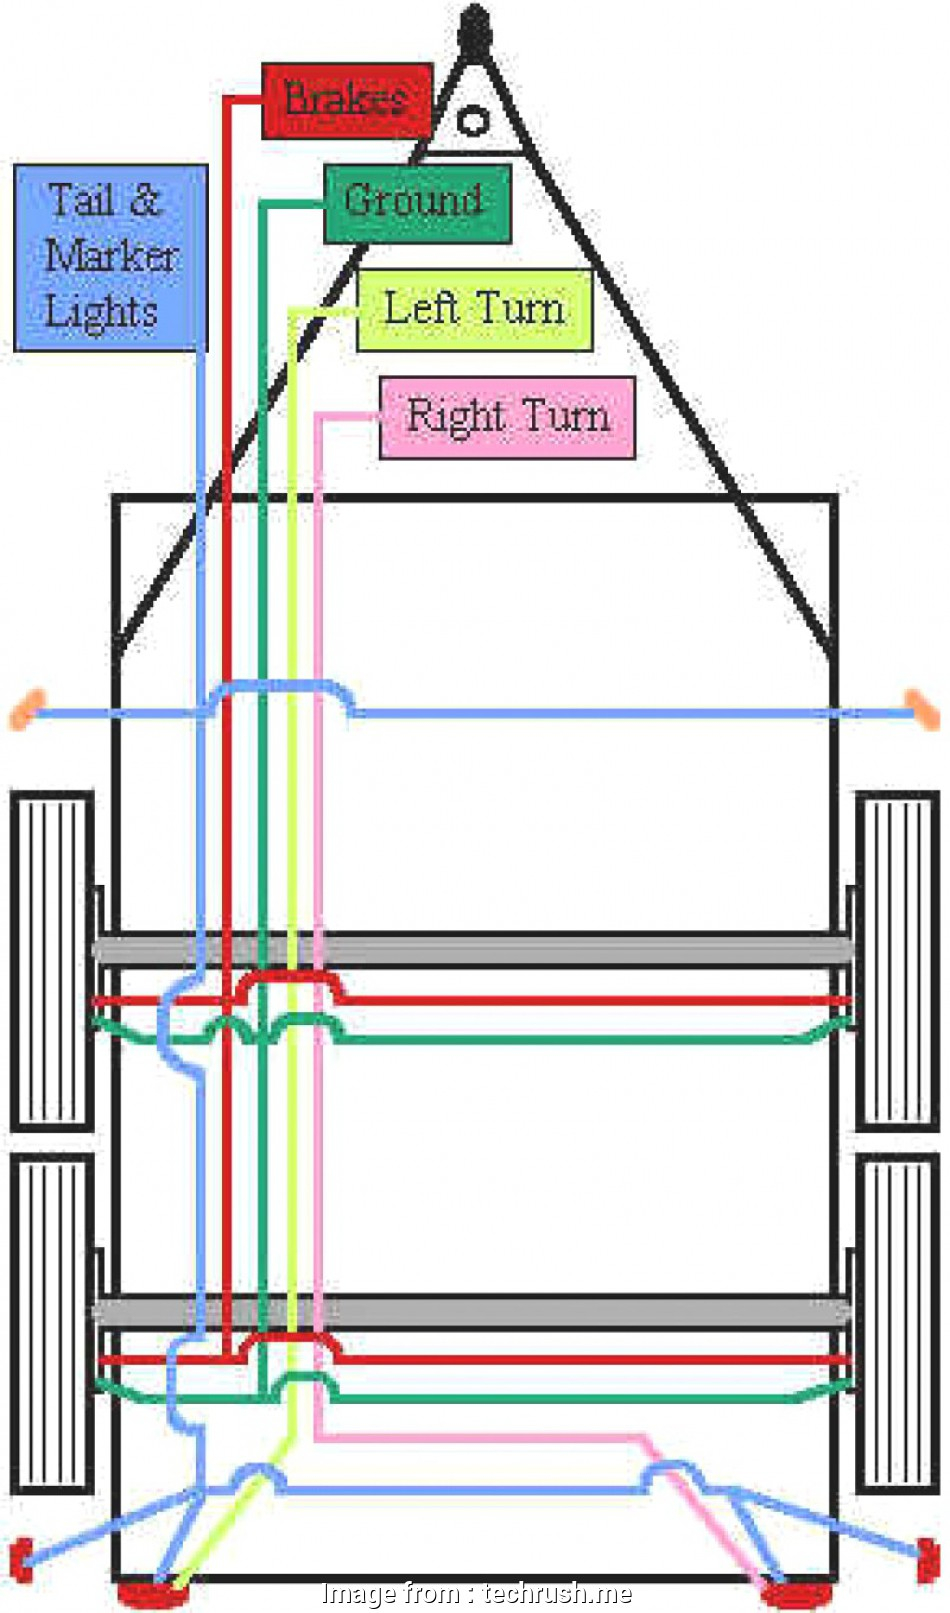 Wiring Diagram For Tandem Axle Trailer With Brakes